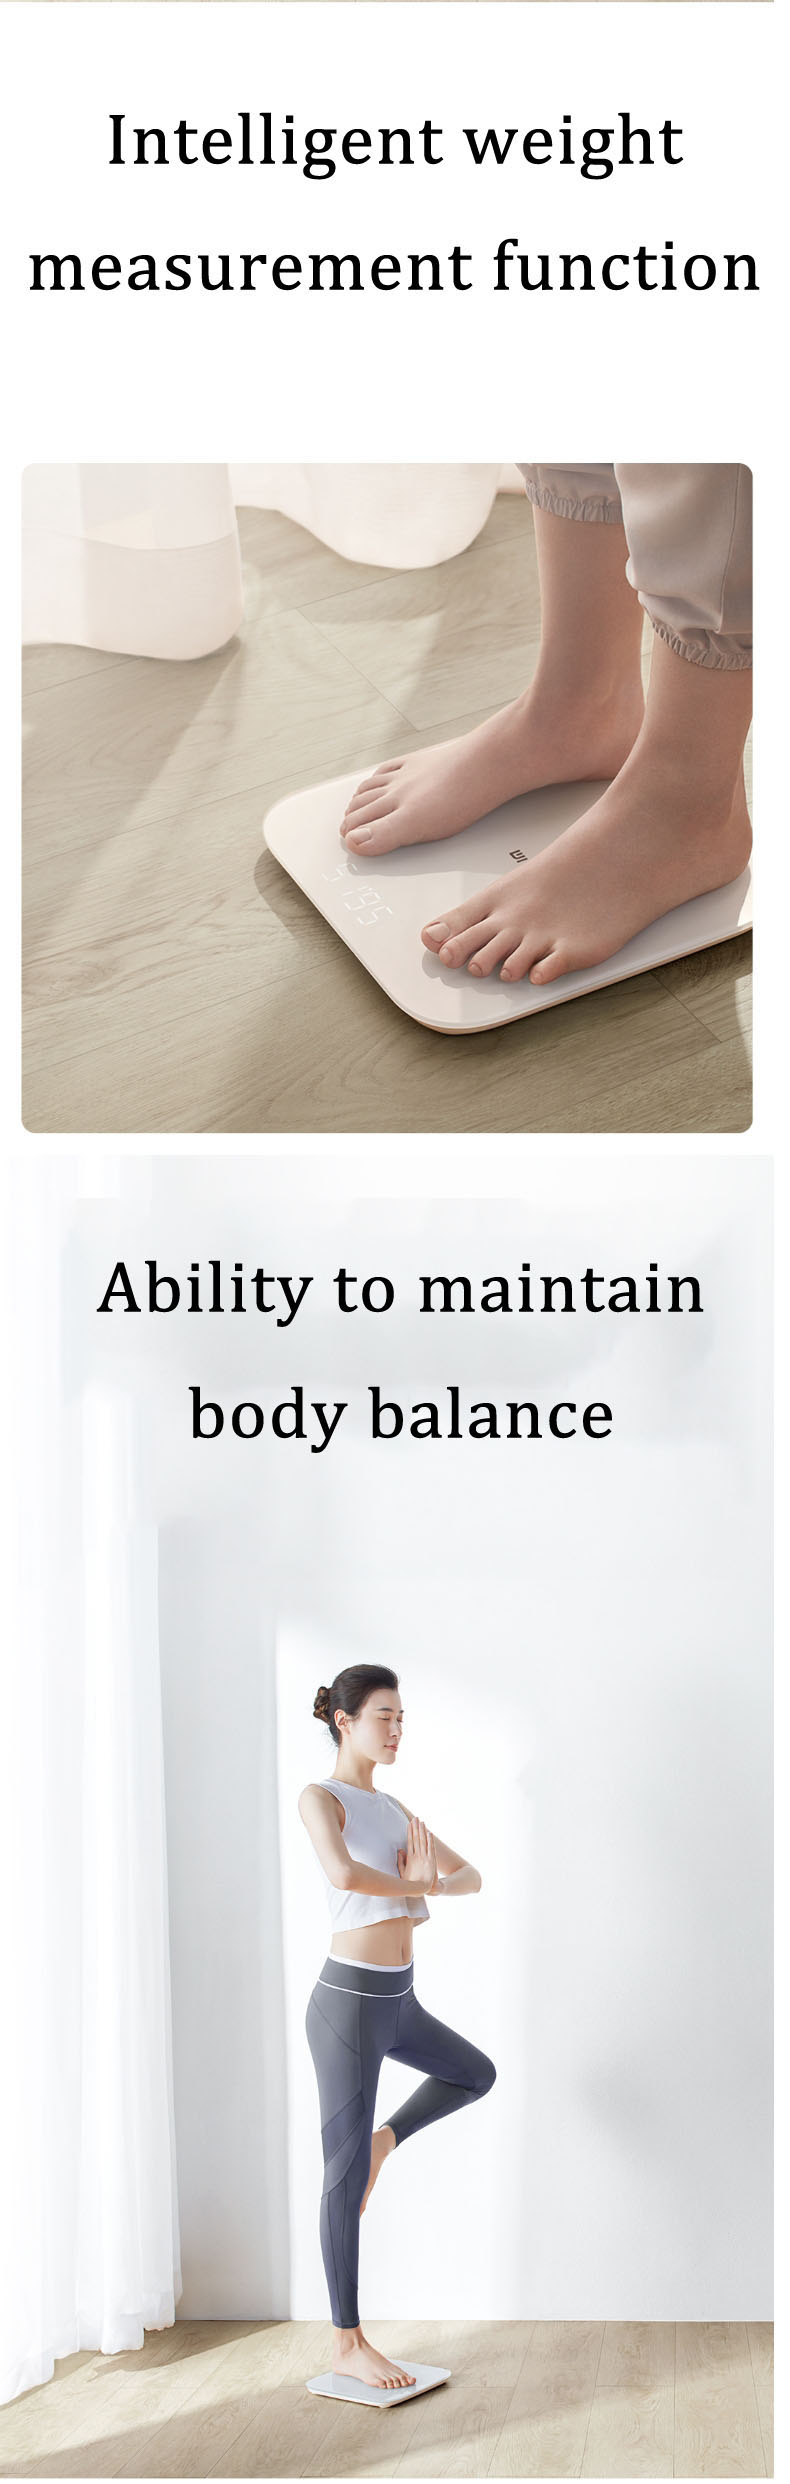 XIAOMI 2.0 Intelligent bluetooth Weight Scale Smart APP Control Precision Weight Scale LED Display Fitness Yoga Tools Scale Support Android IOS 50